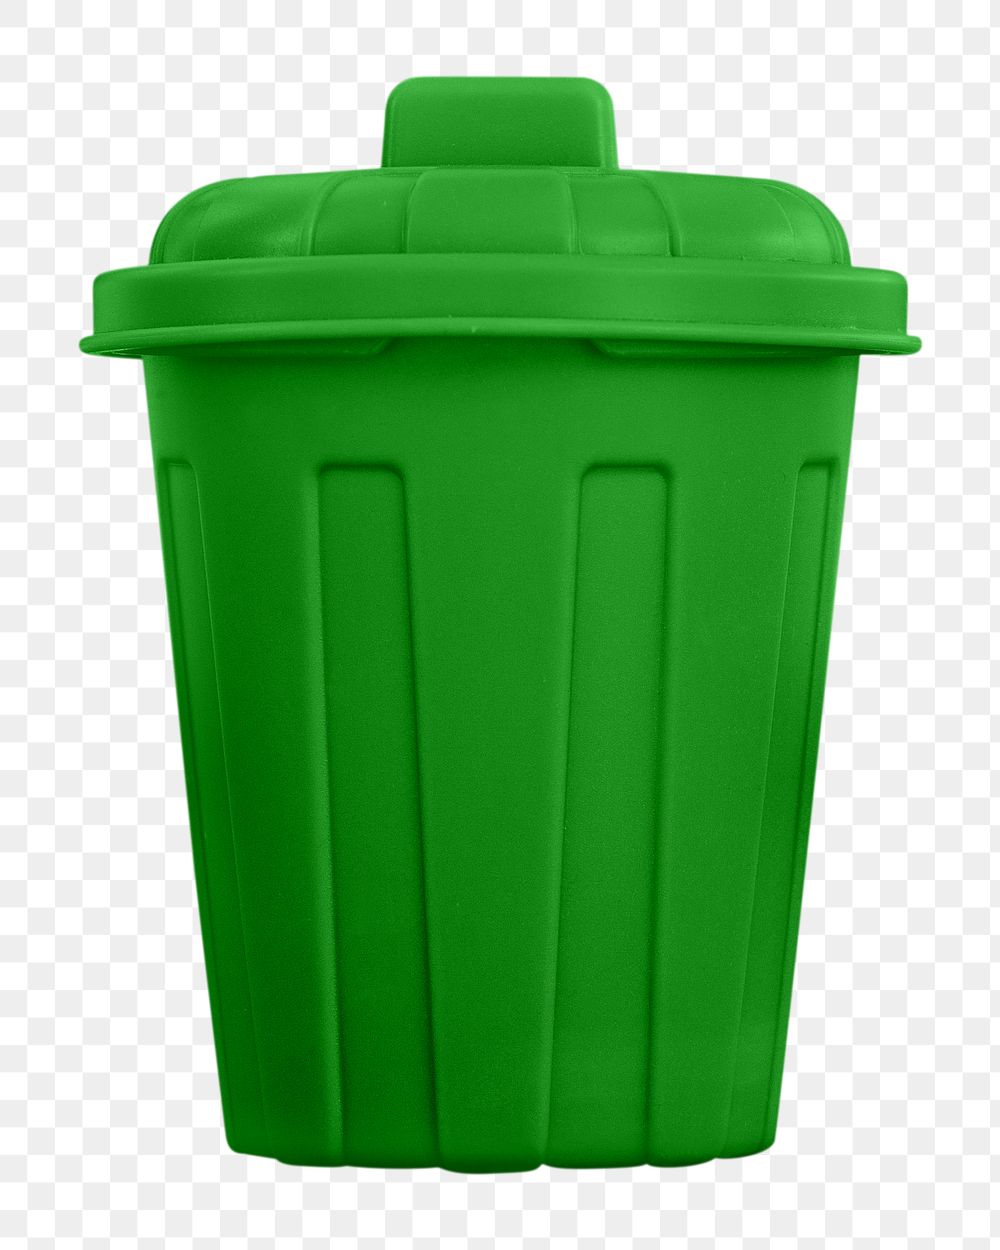 Png green garbage bin, isolated collage element, transparent background